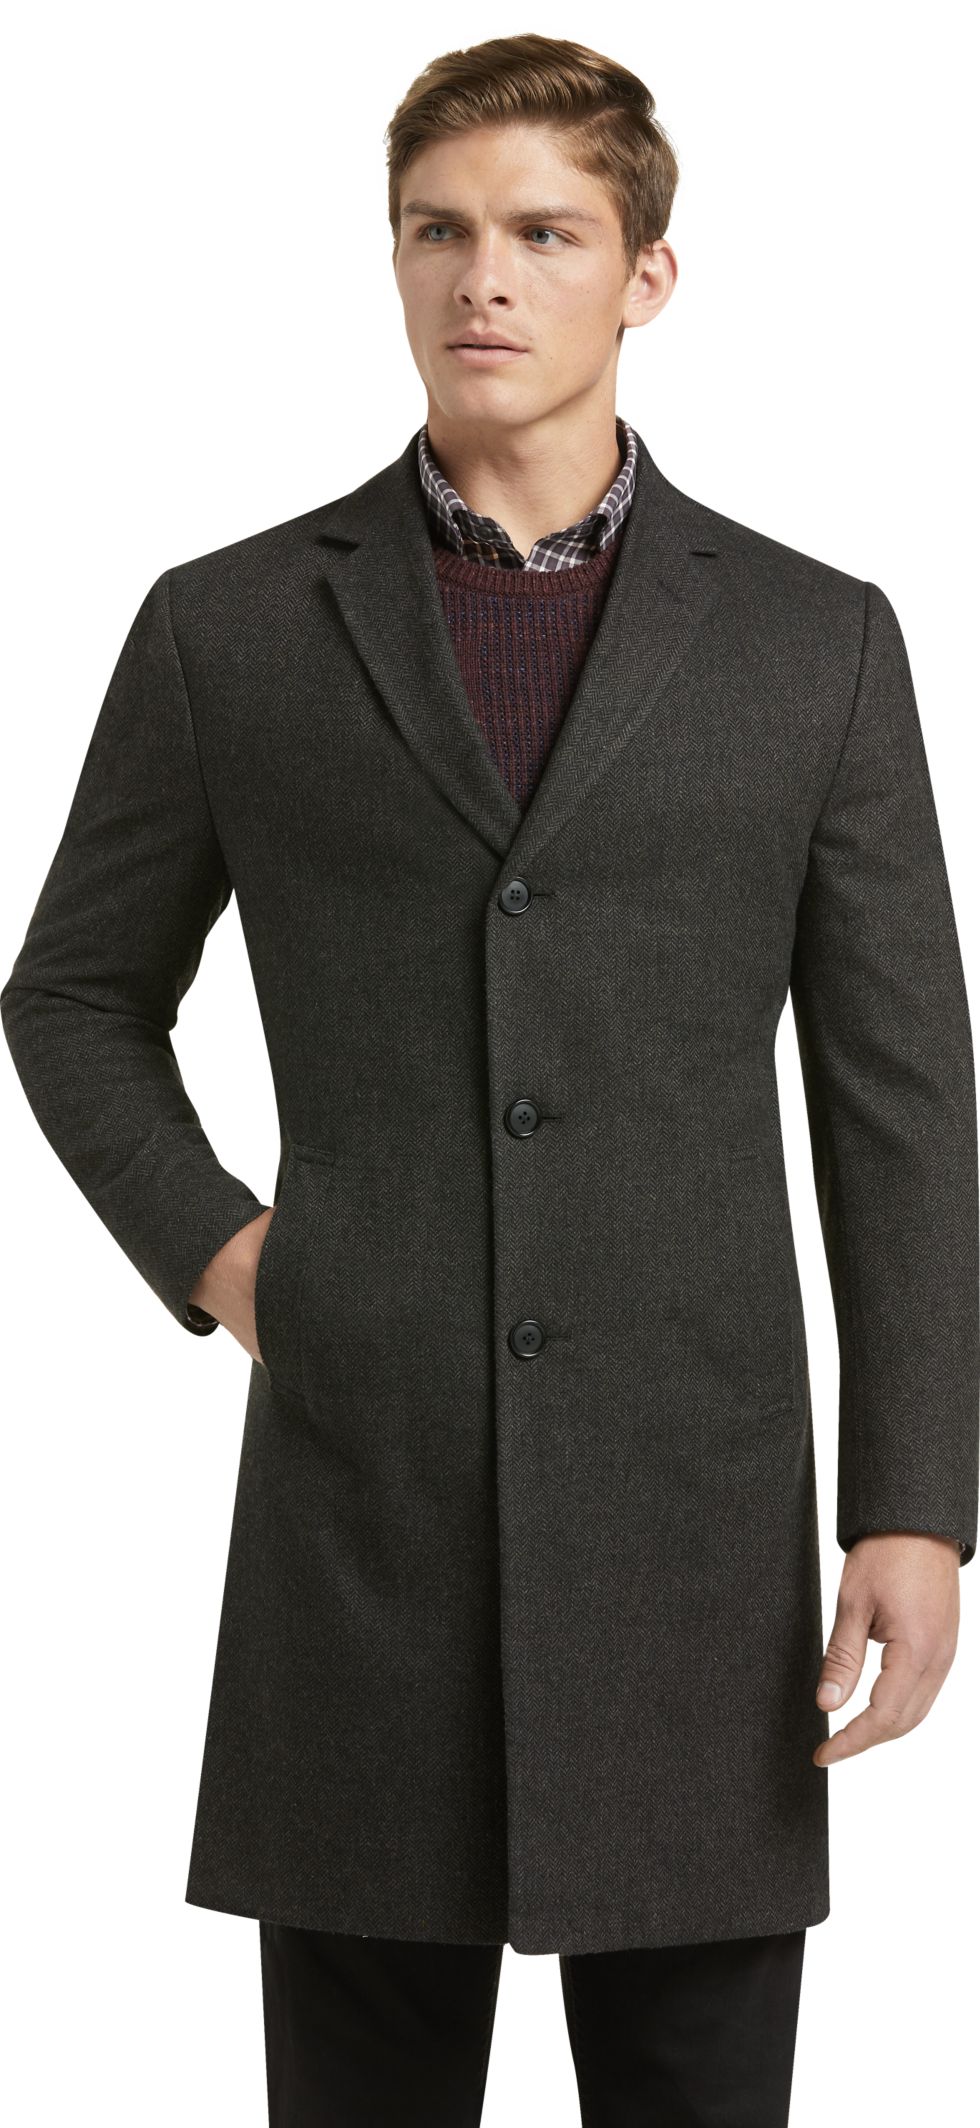 1905 Collection Tailored Fit Herringbone Topcoat CLEARANCE - Outerwear ...